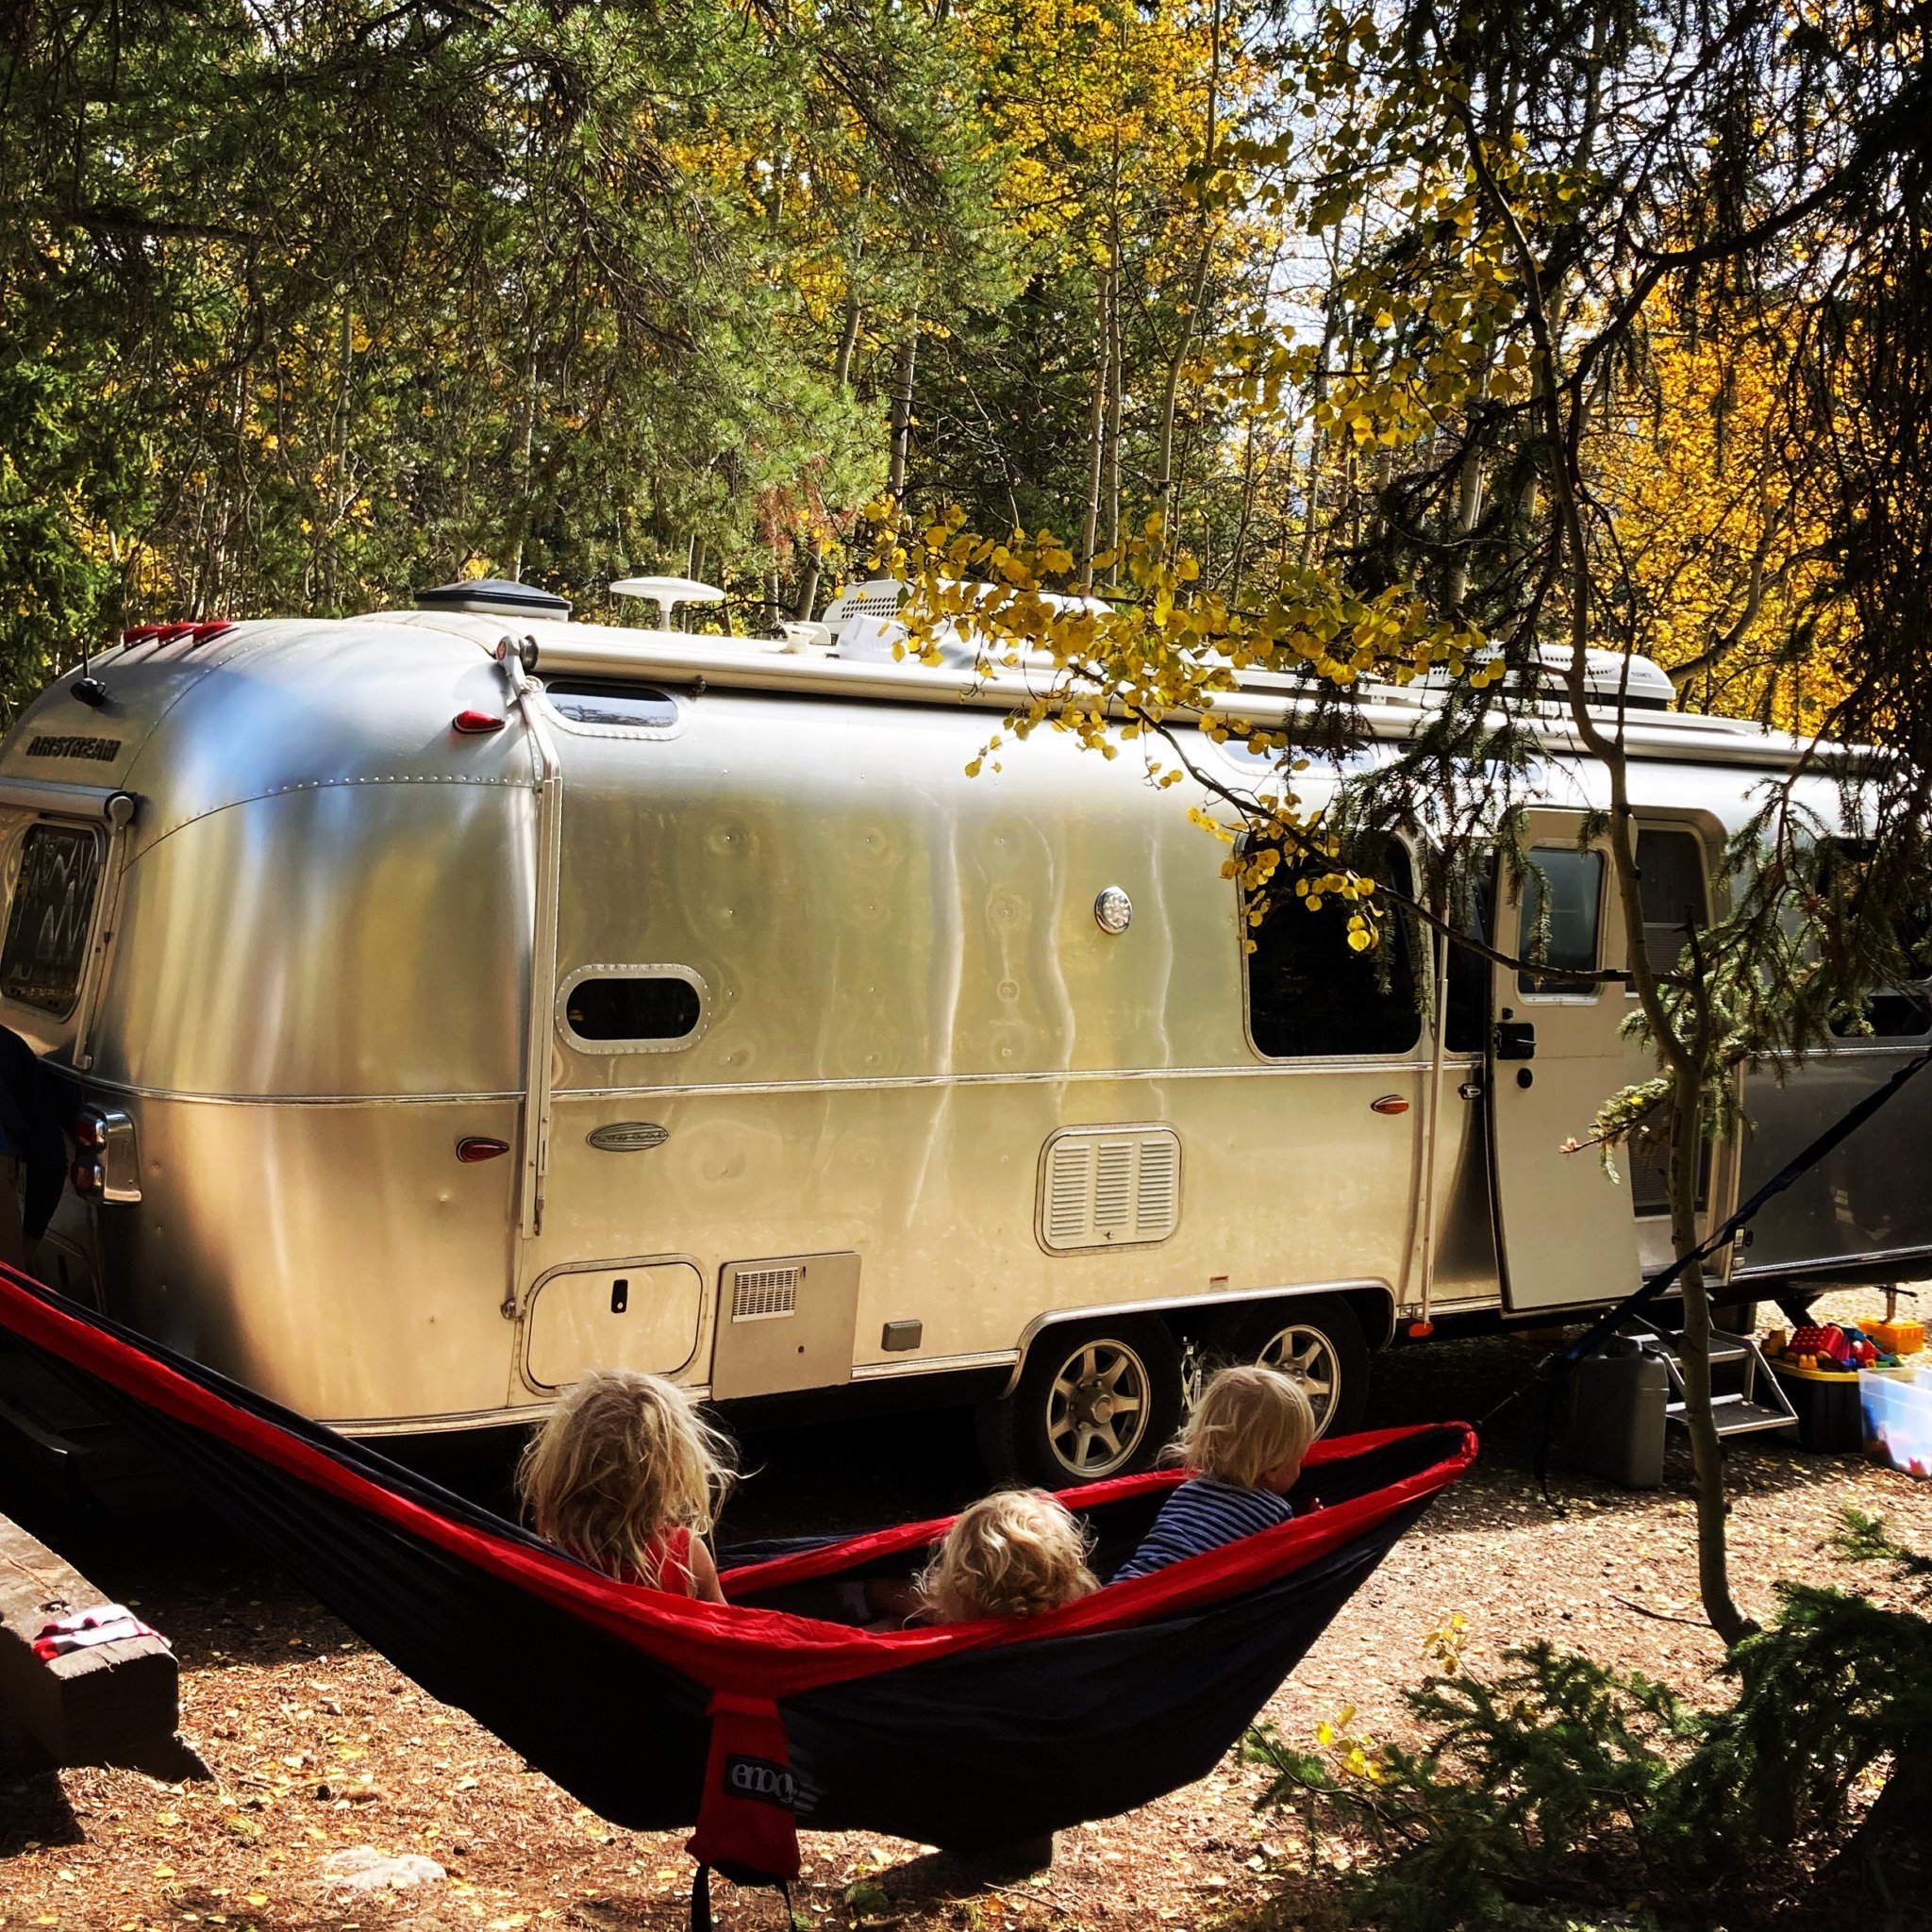 Three kids sitting in a red hammock looking at their Airstream travel trailer that is parked in a woods.